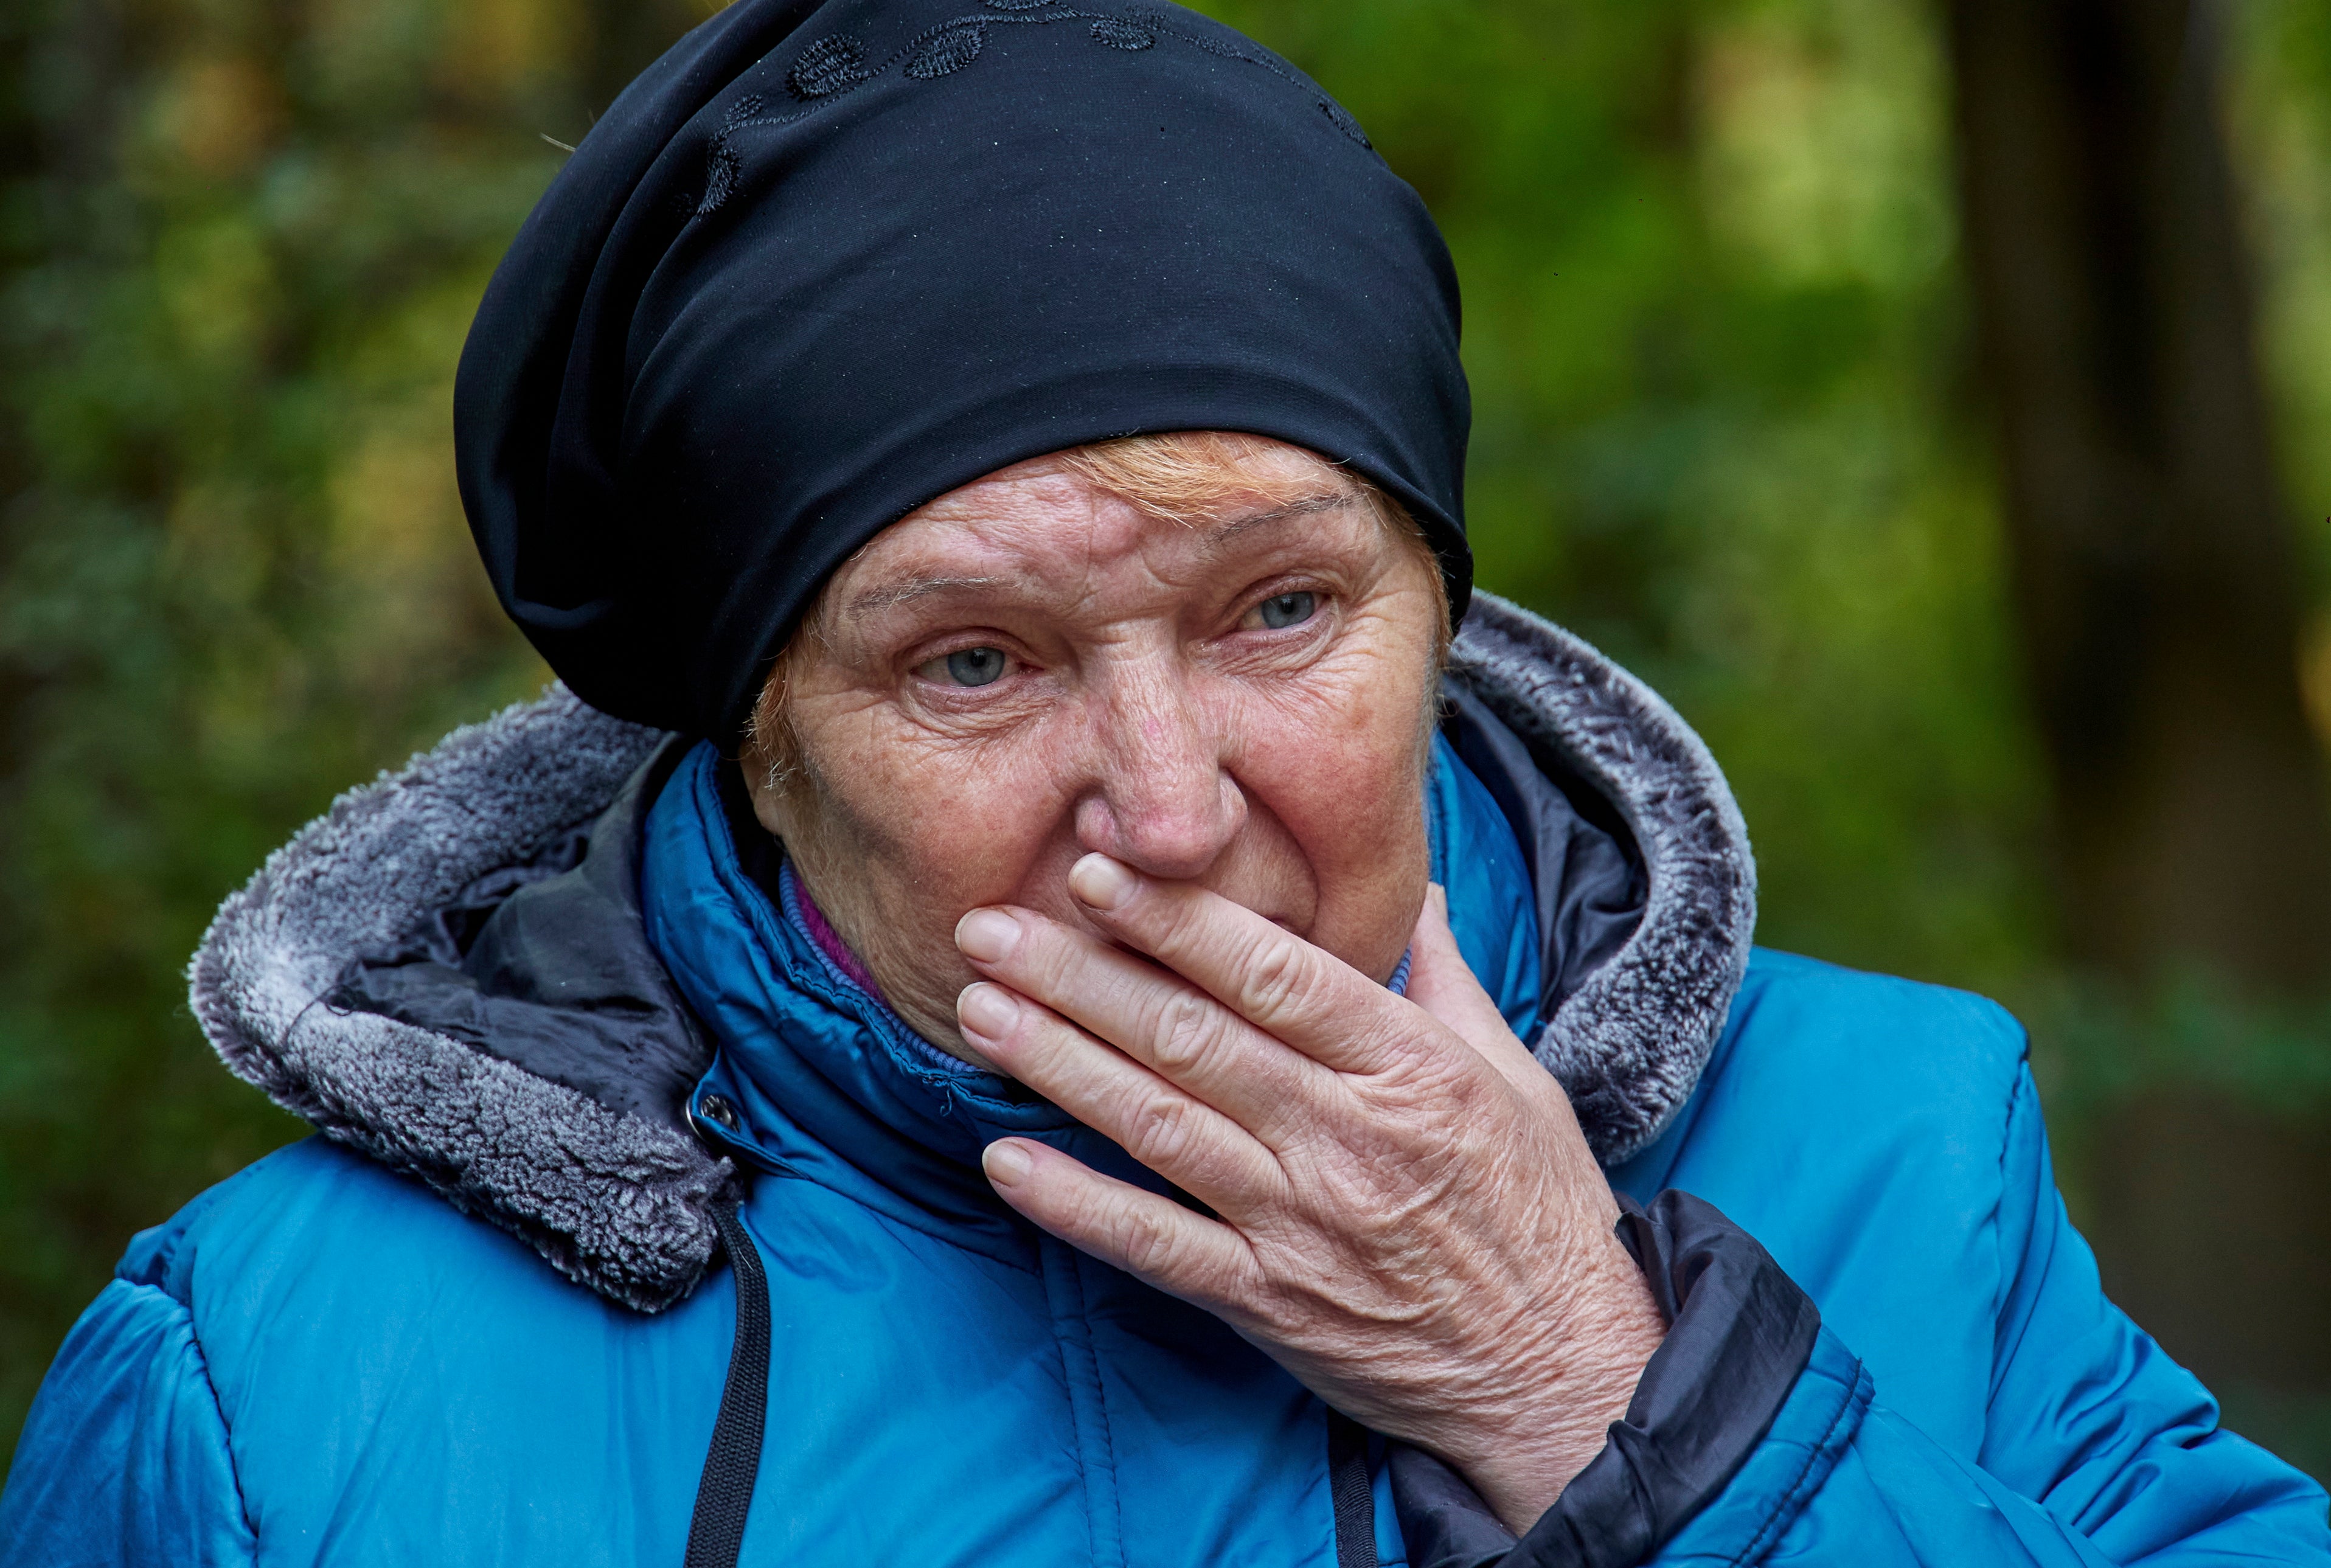 Tamara, a survivor of the Russian attack on a Ukranian evacuee convoy in Kurylivka that killed at least 24 people